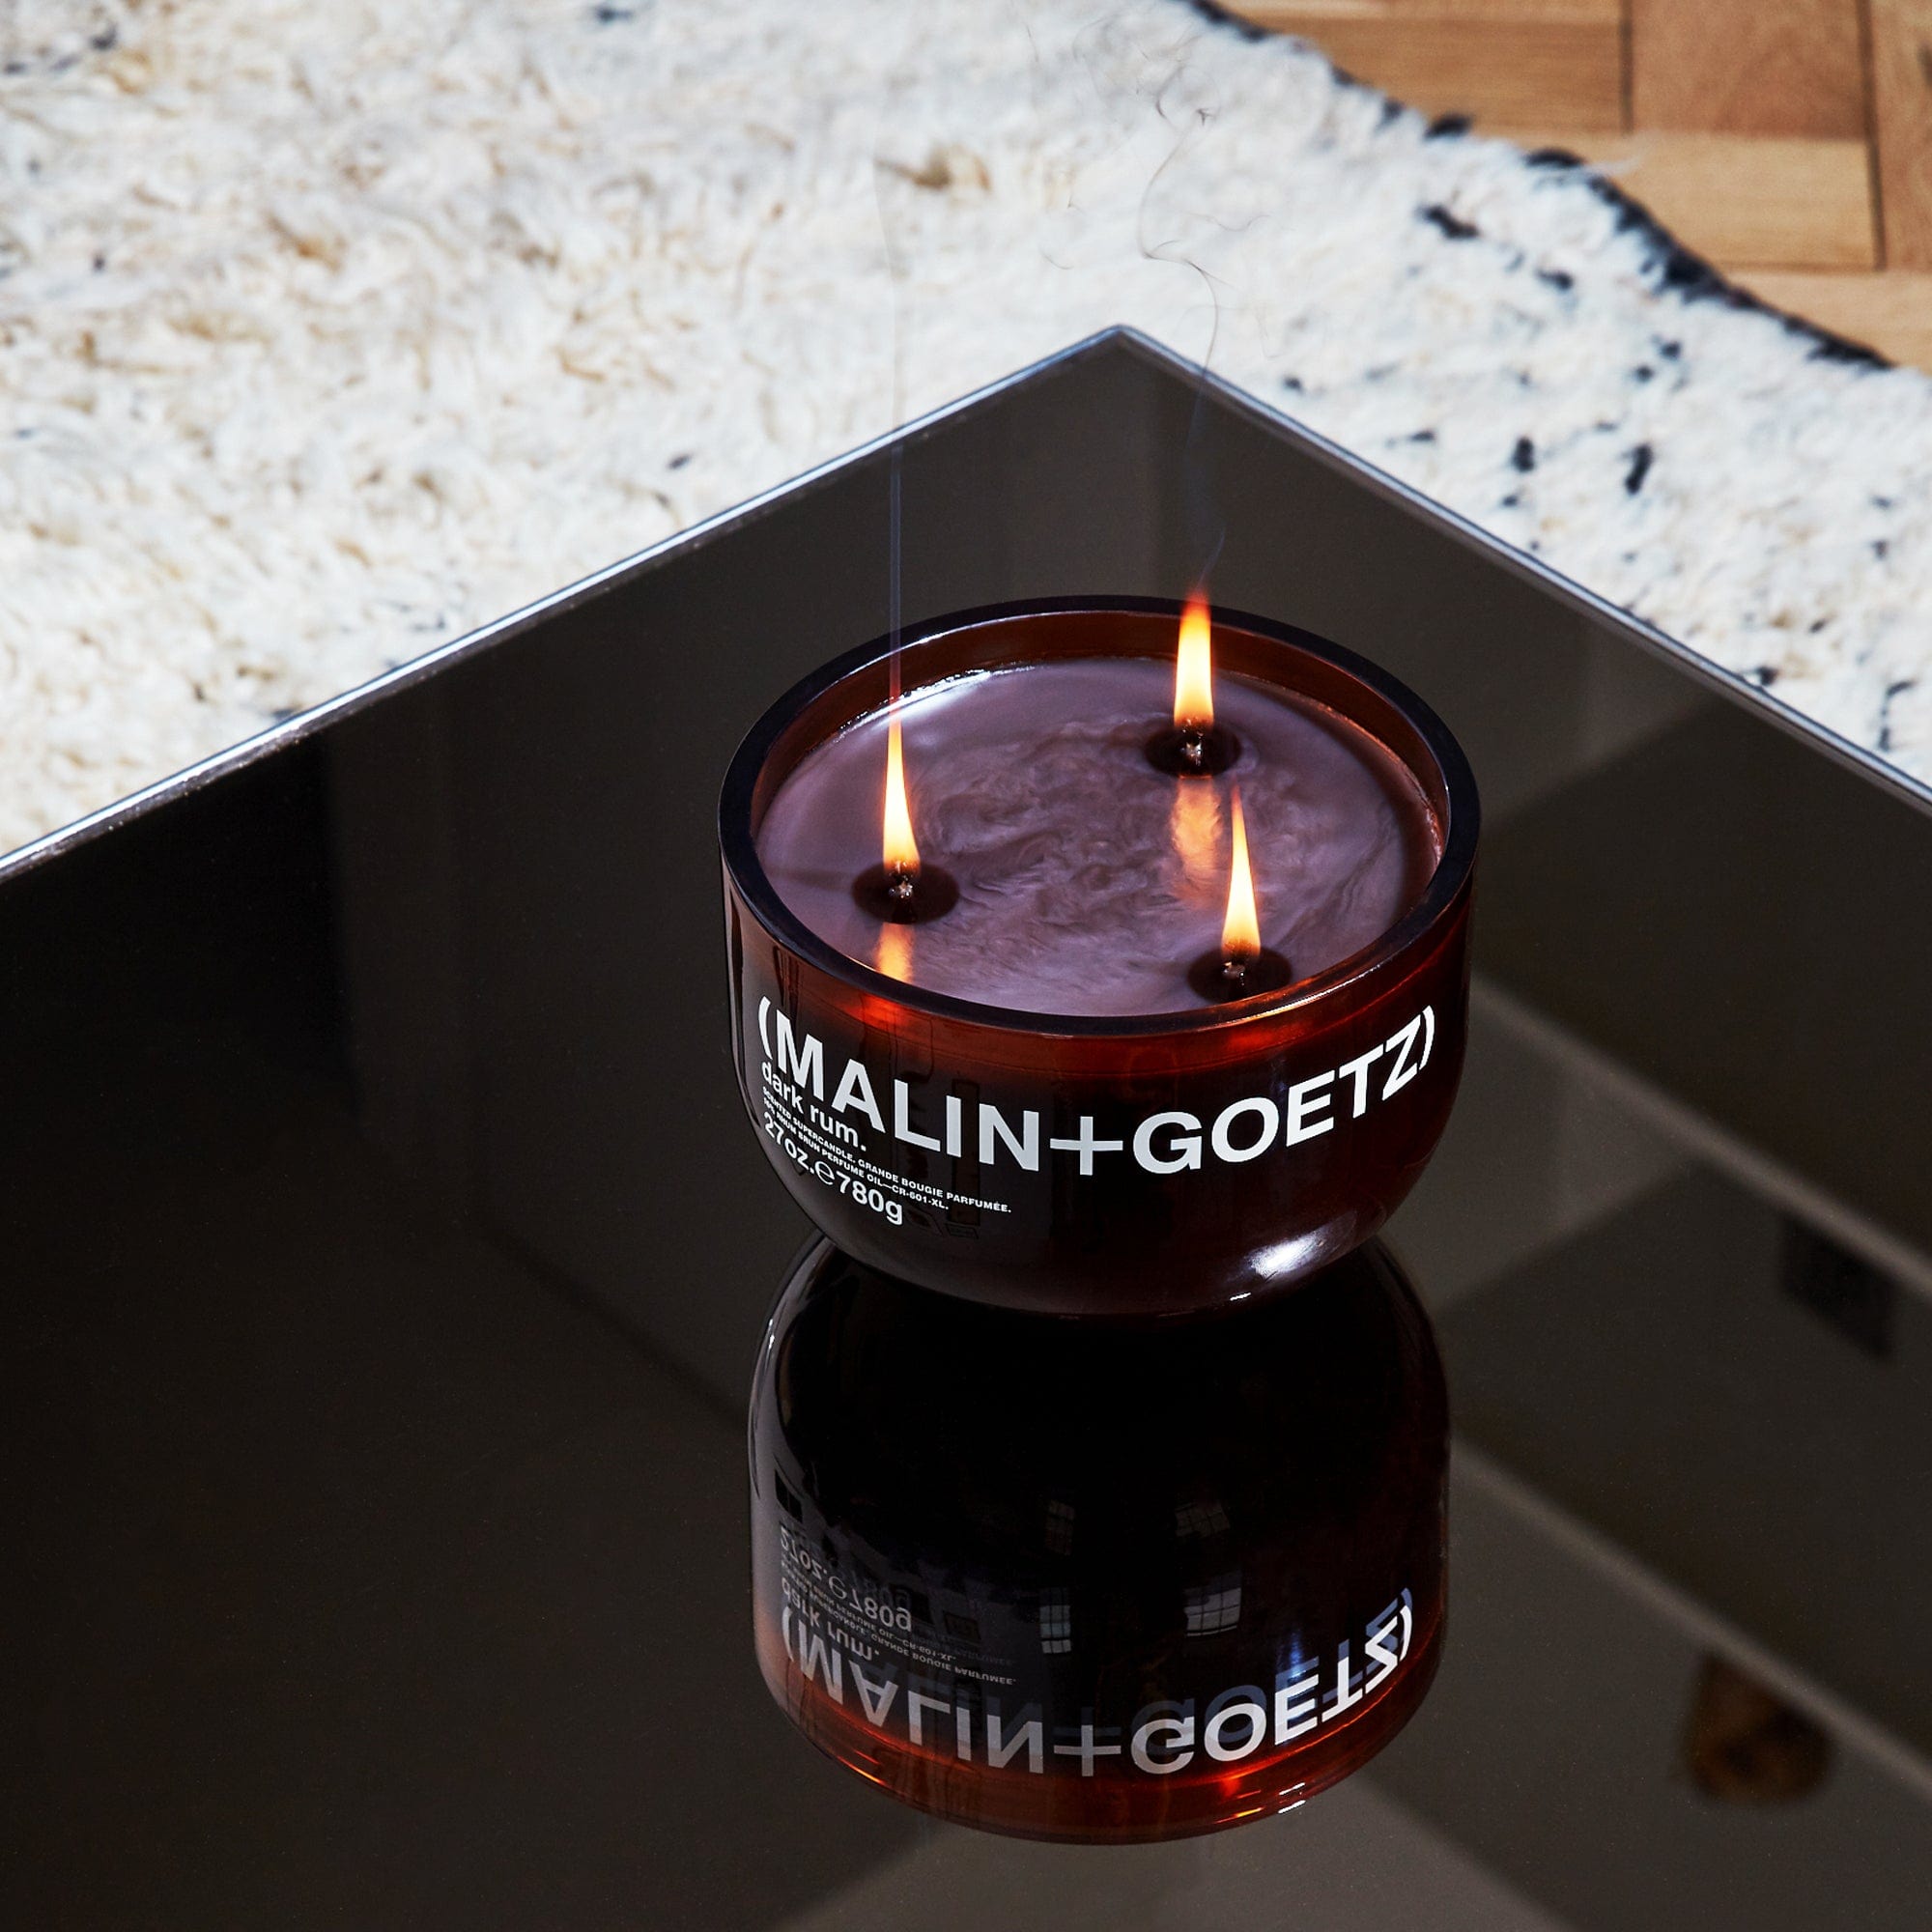 Dark Rum Candle (MALIN+GOETZ) Scented Candle